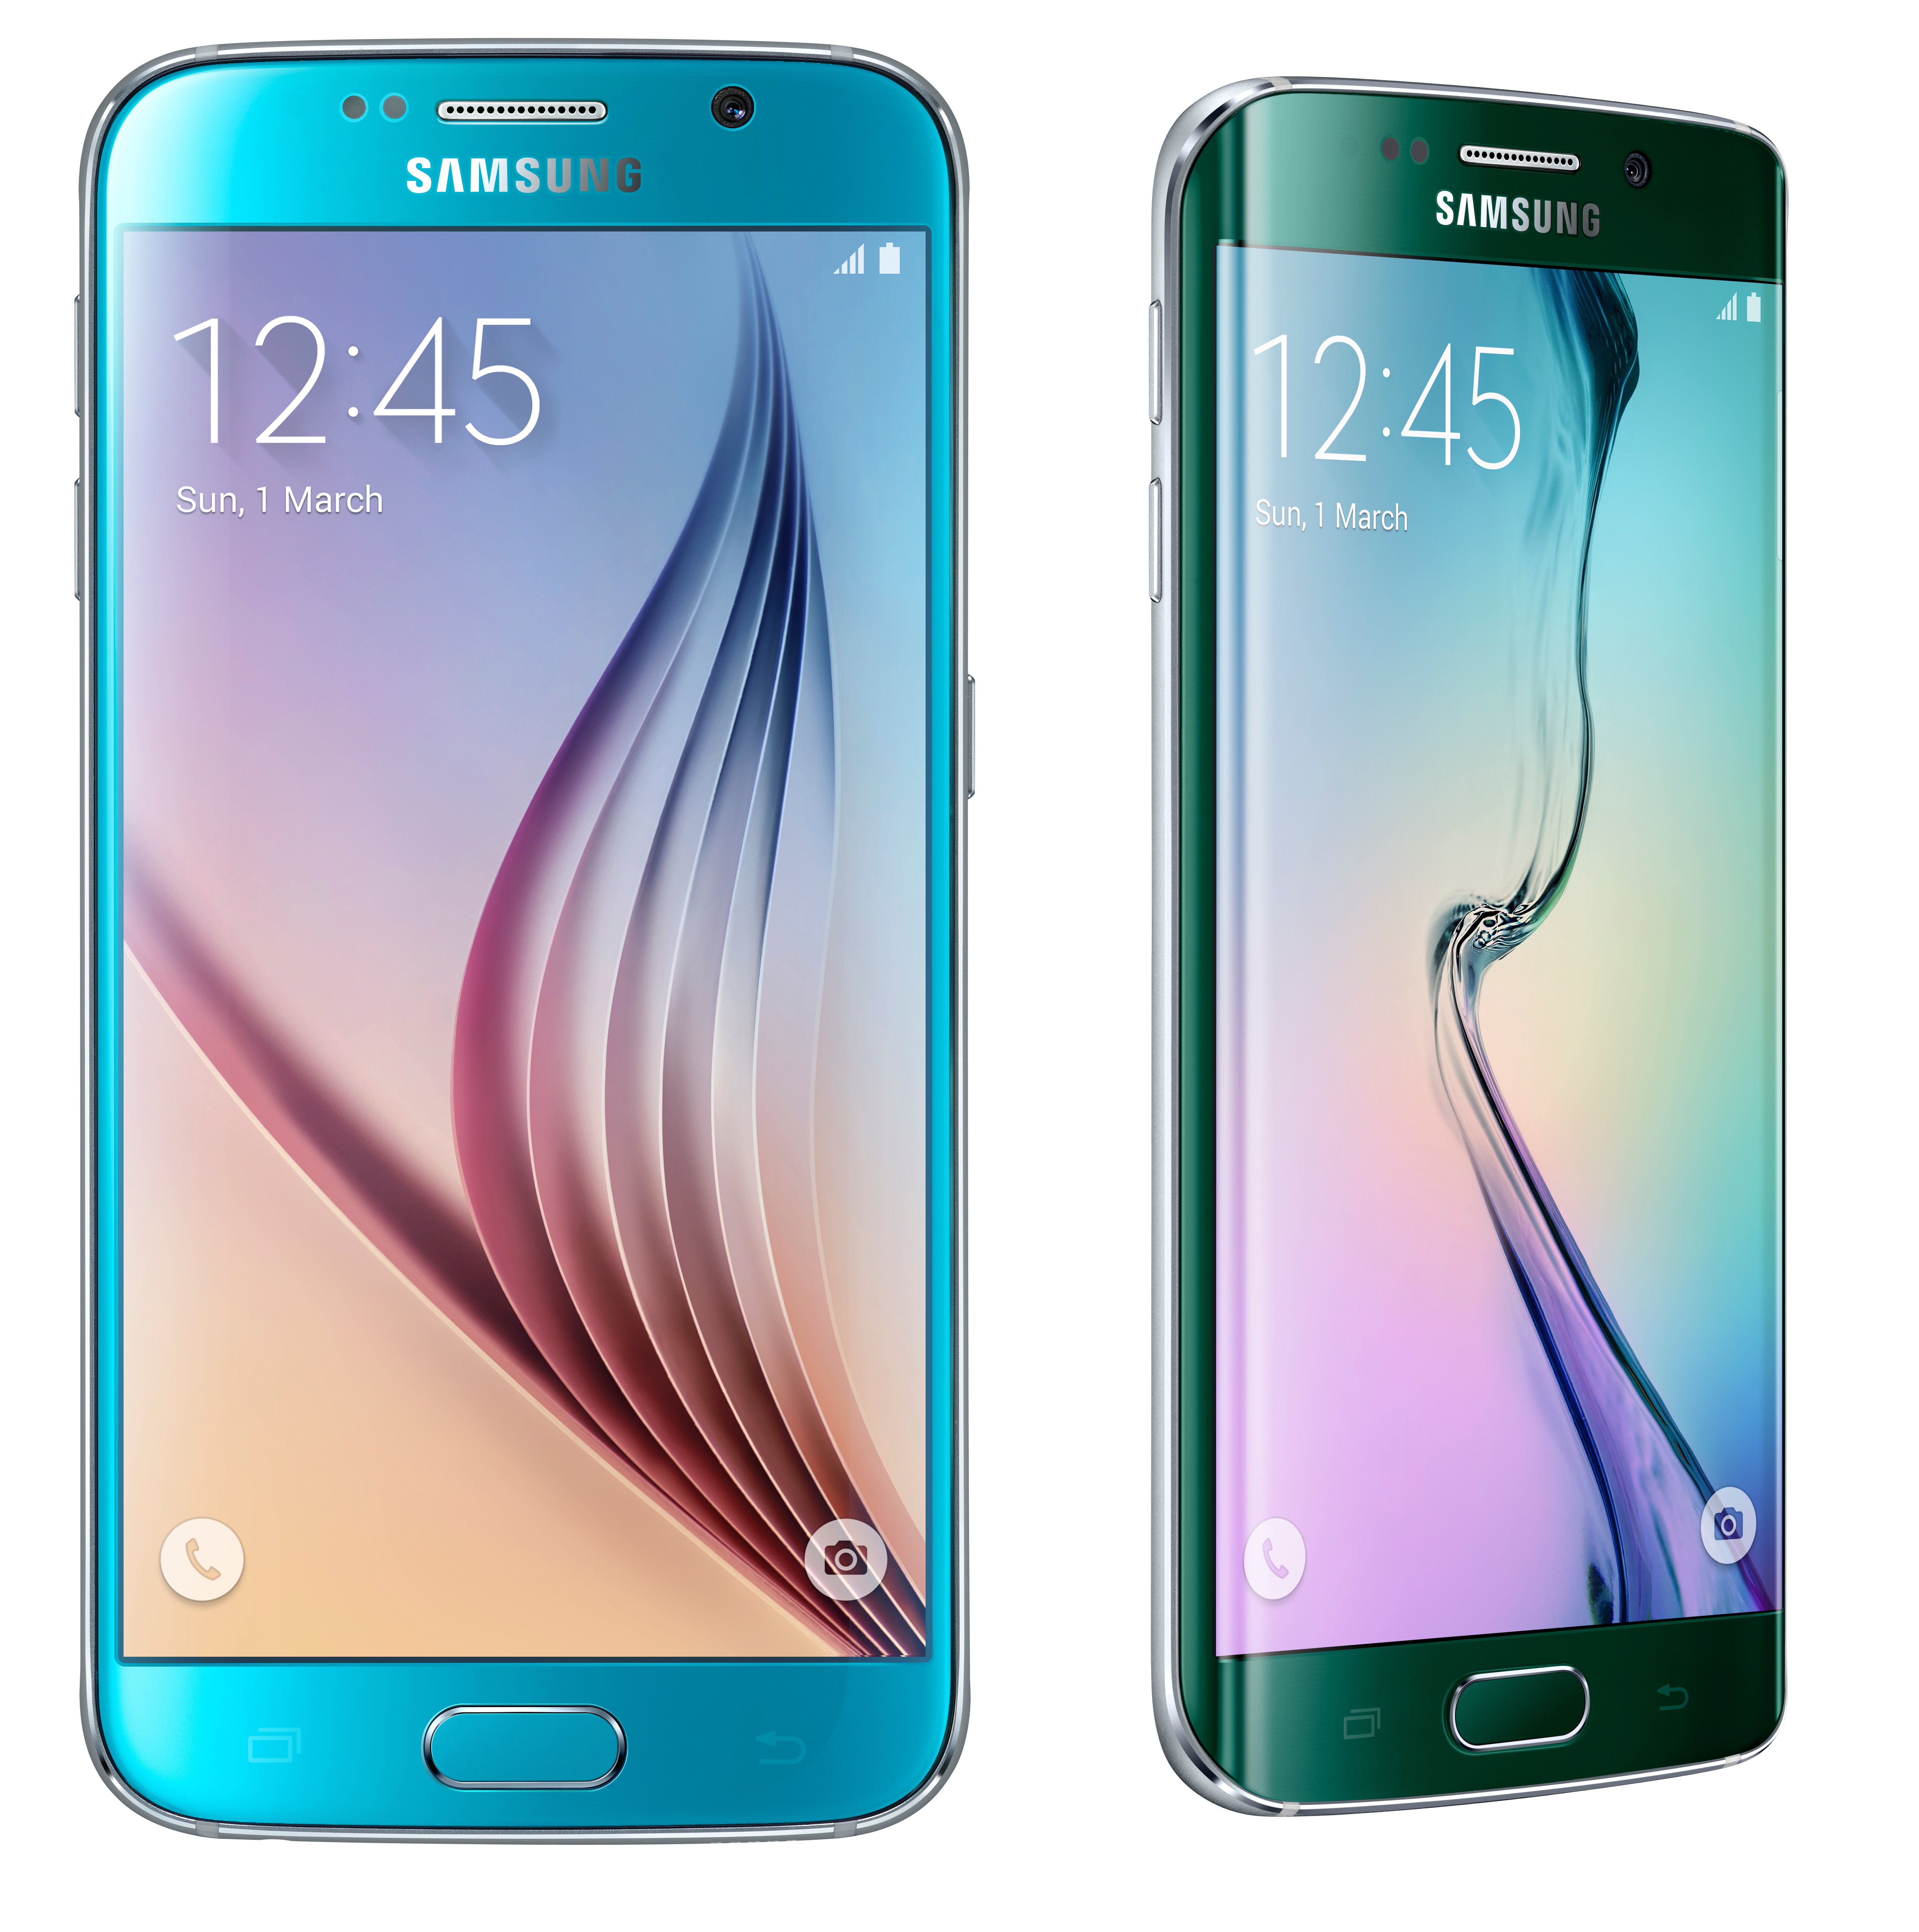 The big difference is the dual-curved edge display on the Galaxy S6 Edge.